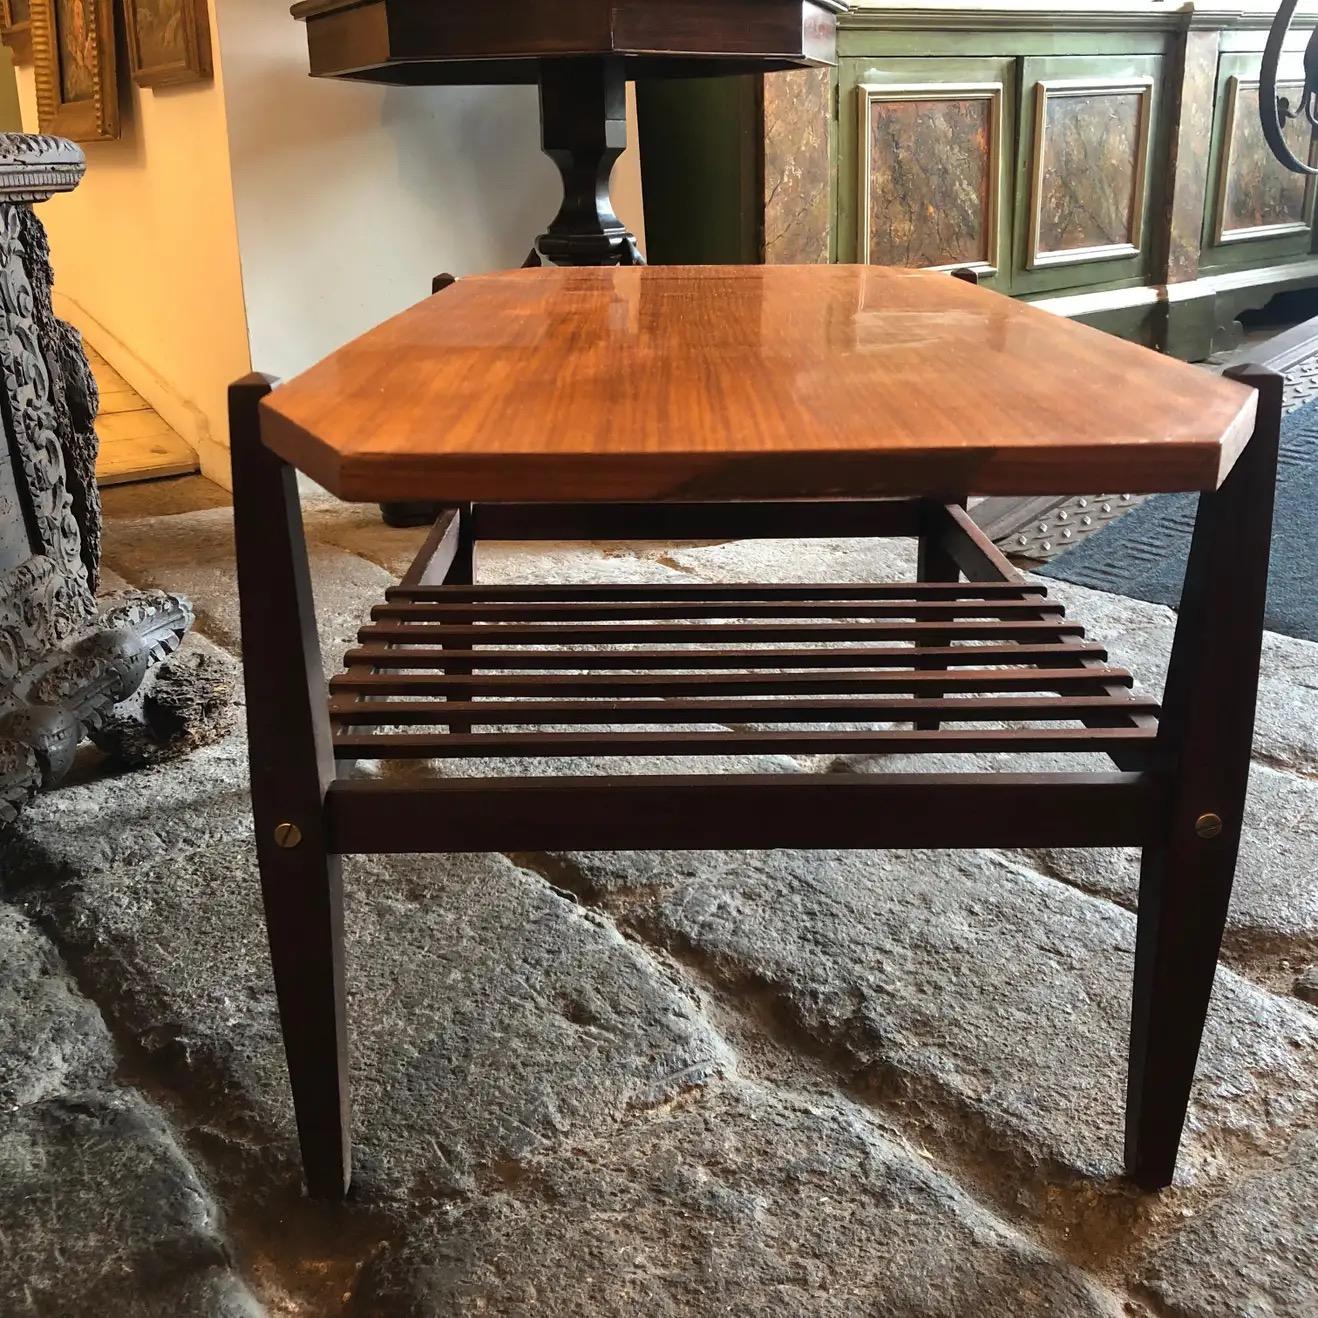 A stylish teak and mahogany coffee table made in Italy in the 1960s in very good conditions. This item it's in a lovely clean scandinavian style.
This wood octagonal Italian coffee table features clean lines, geometric shapes, and a combination of